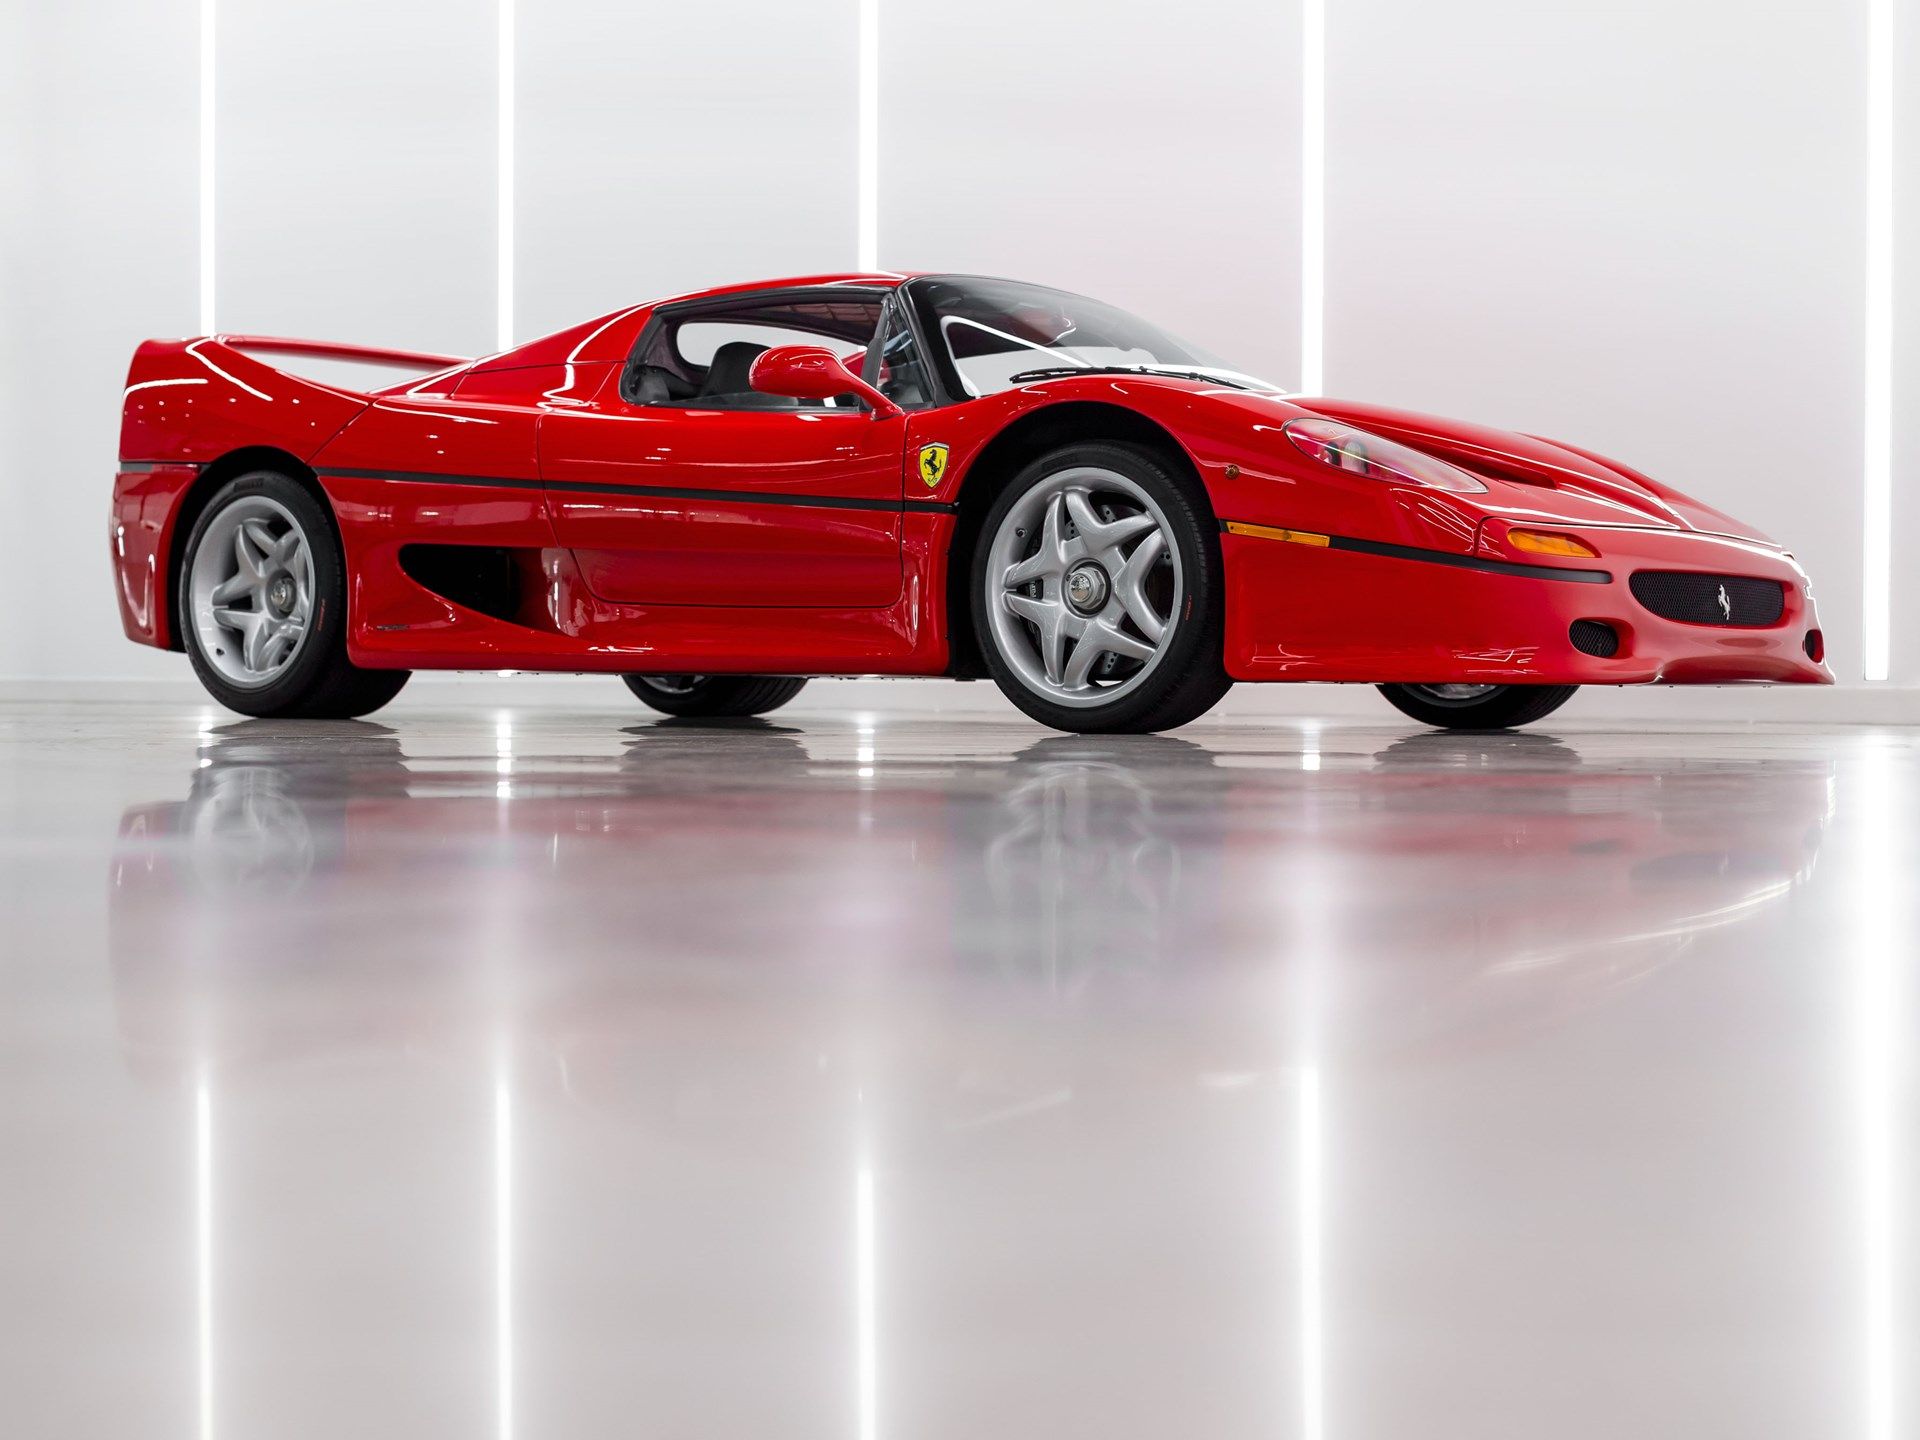 Why The Ferrari F50 Actually Costs More Than The F40